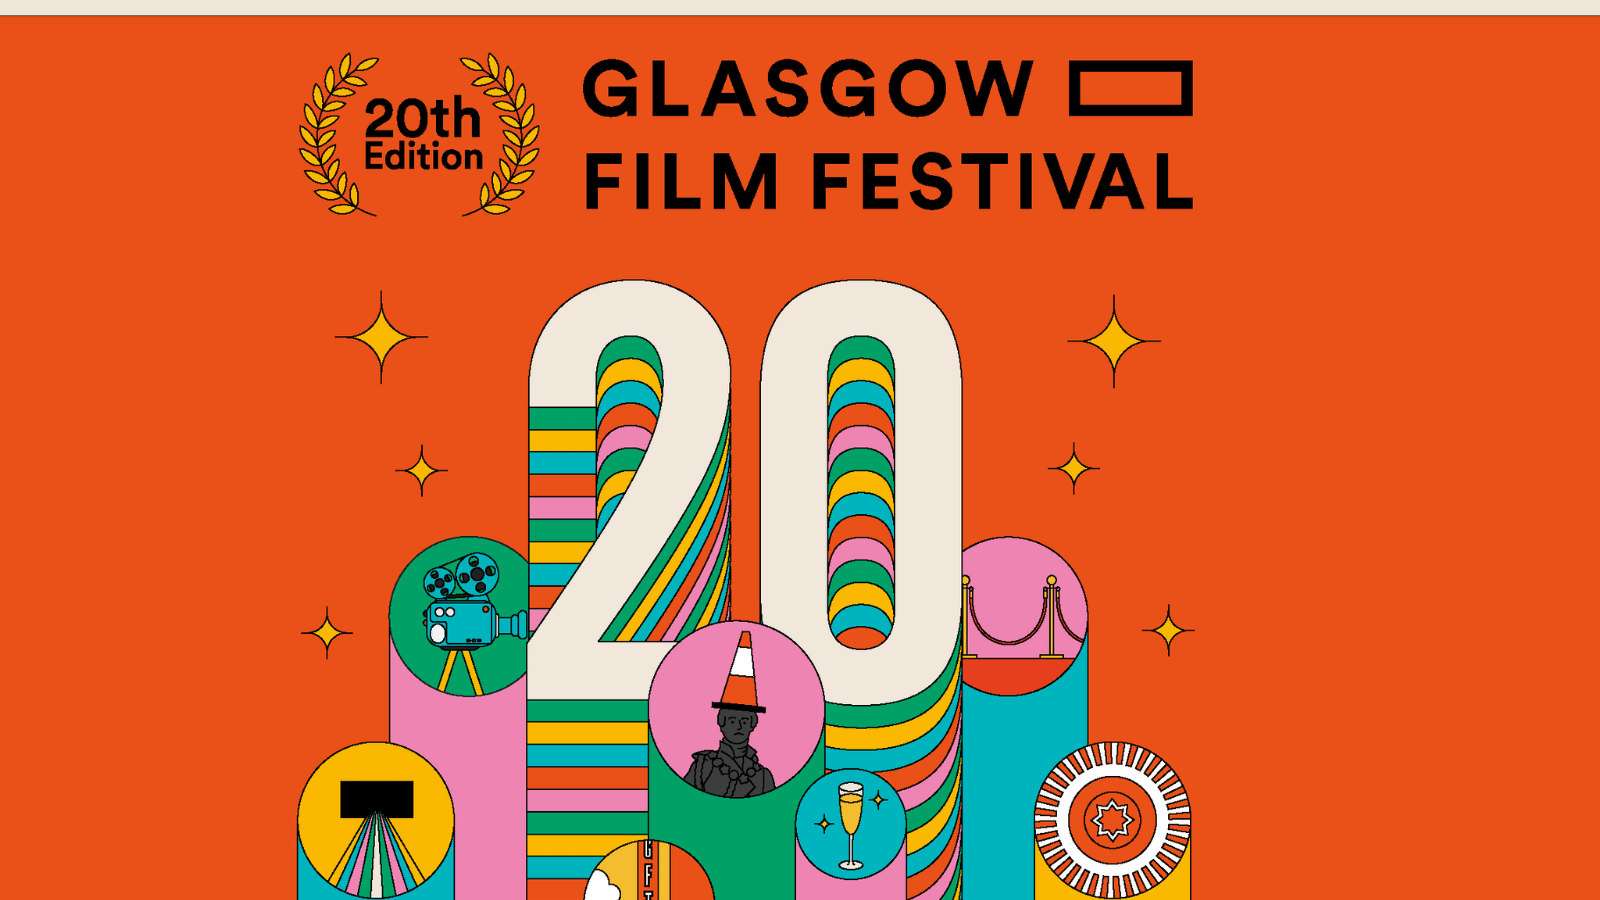 Glasgow Film Festival 20th Anniversary text on top of red background with colourful shapes